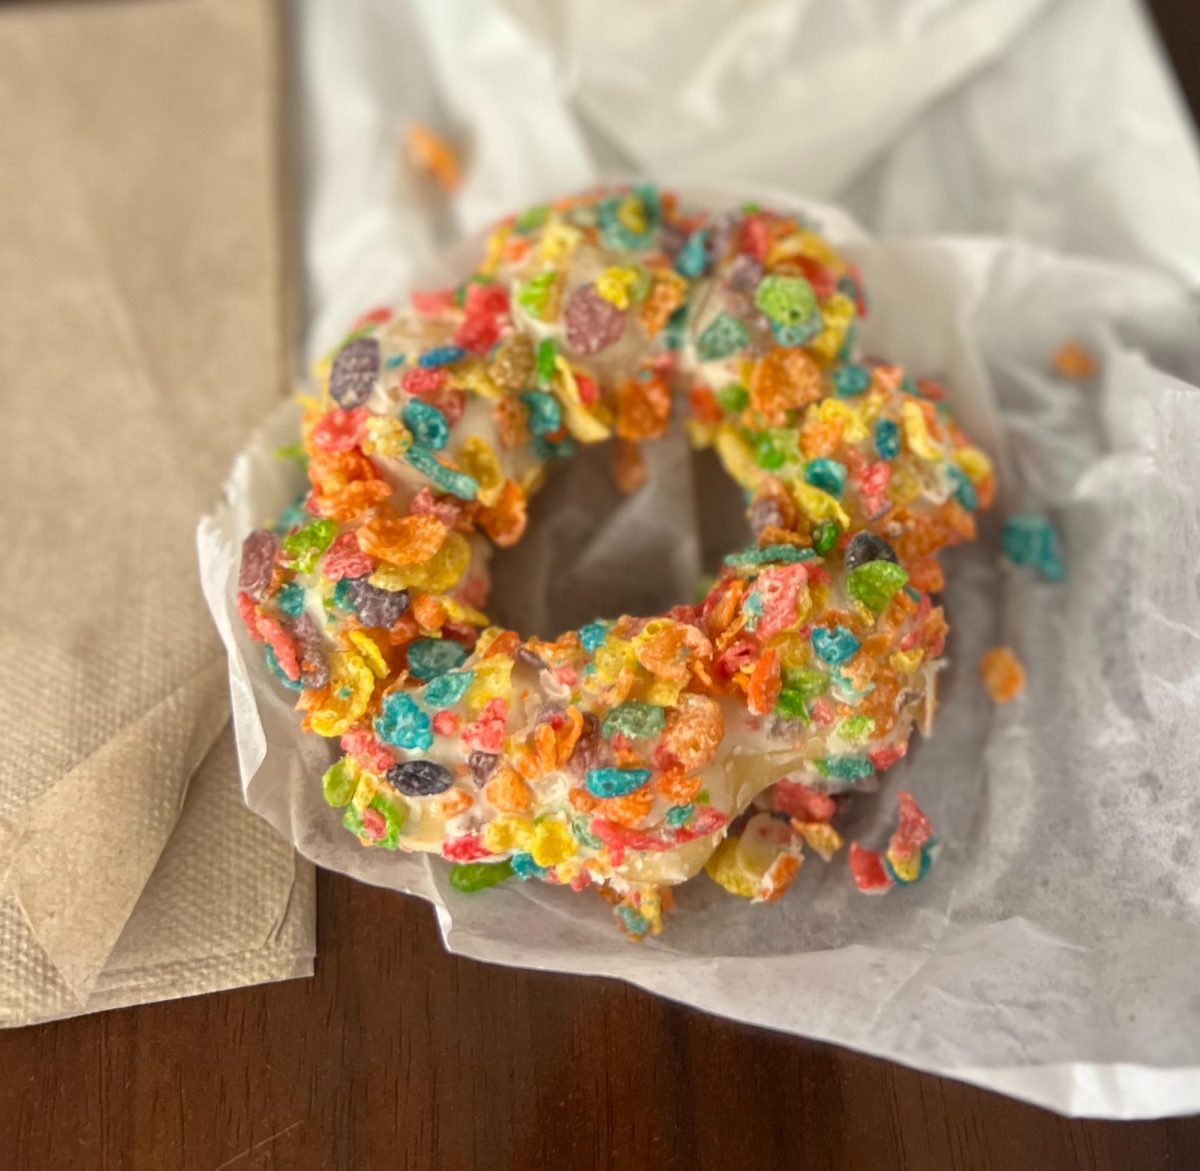 The Cereal Donut from Afternoon.Bayside